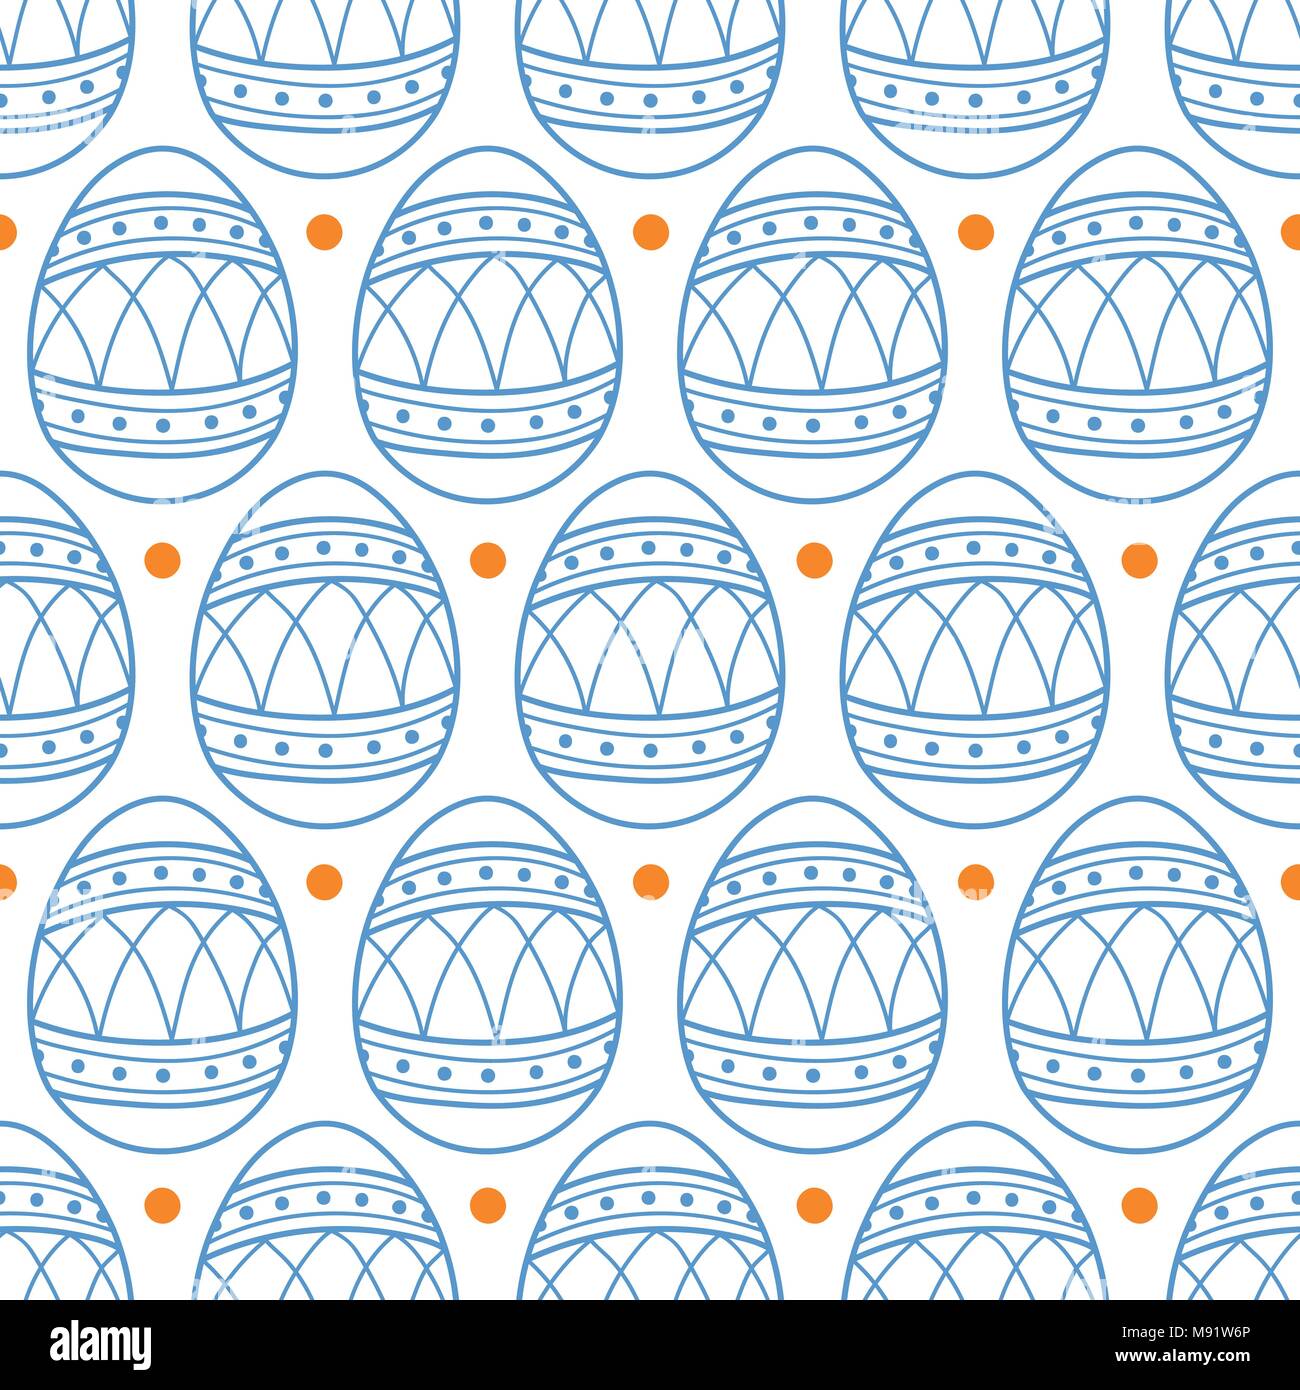 Easter eggs in blue outline and orange dots on white background. Cute hand drawn seamless pattern design for Easter festival in vector illustration. Stock Vector